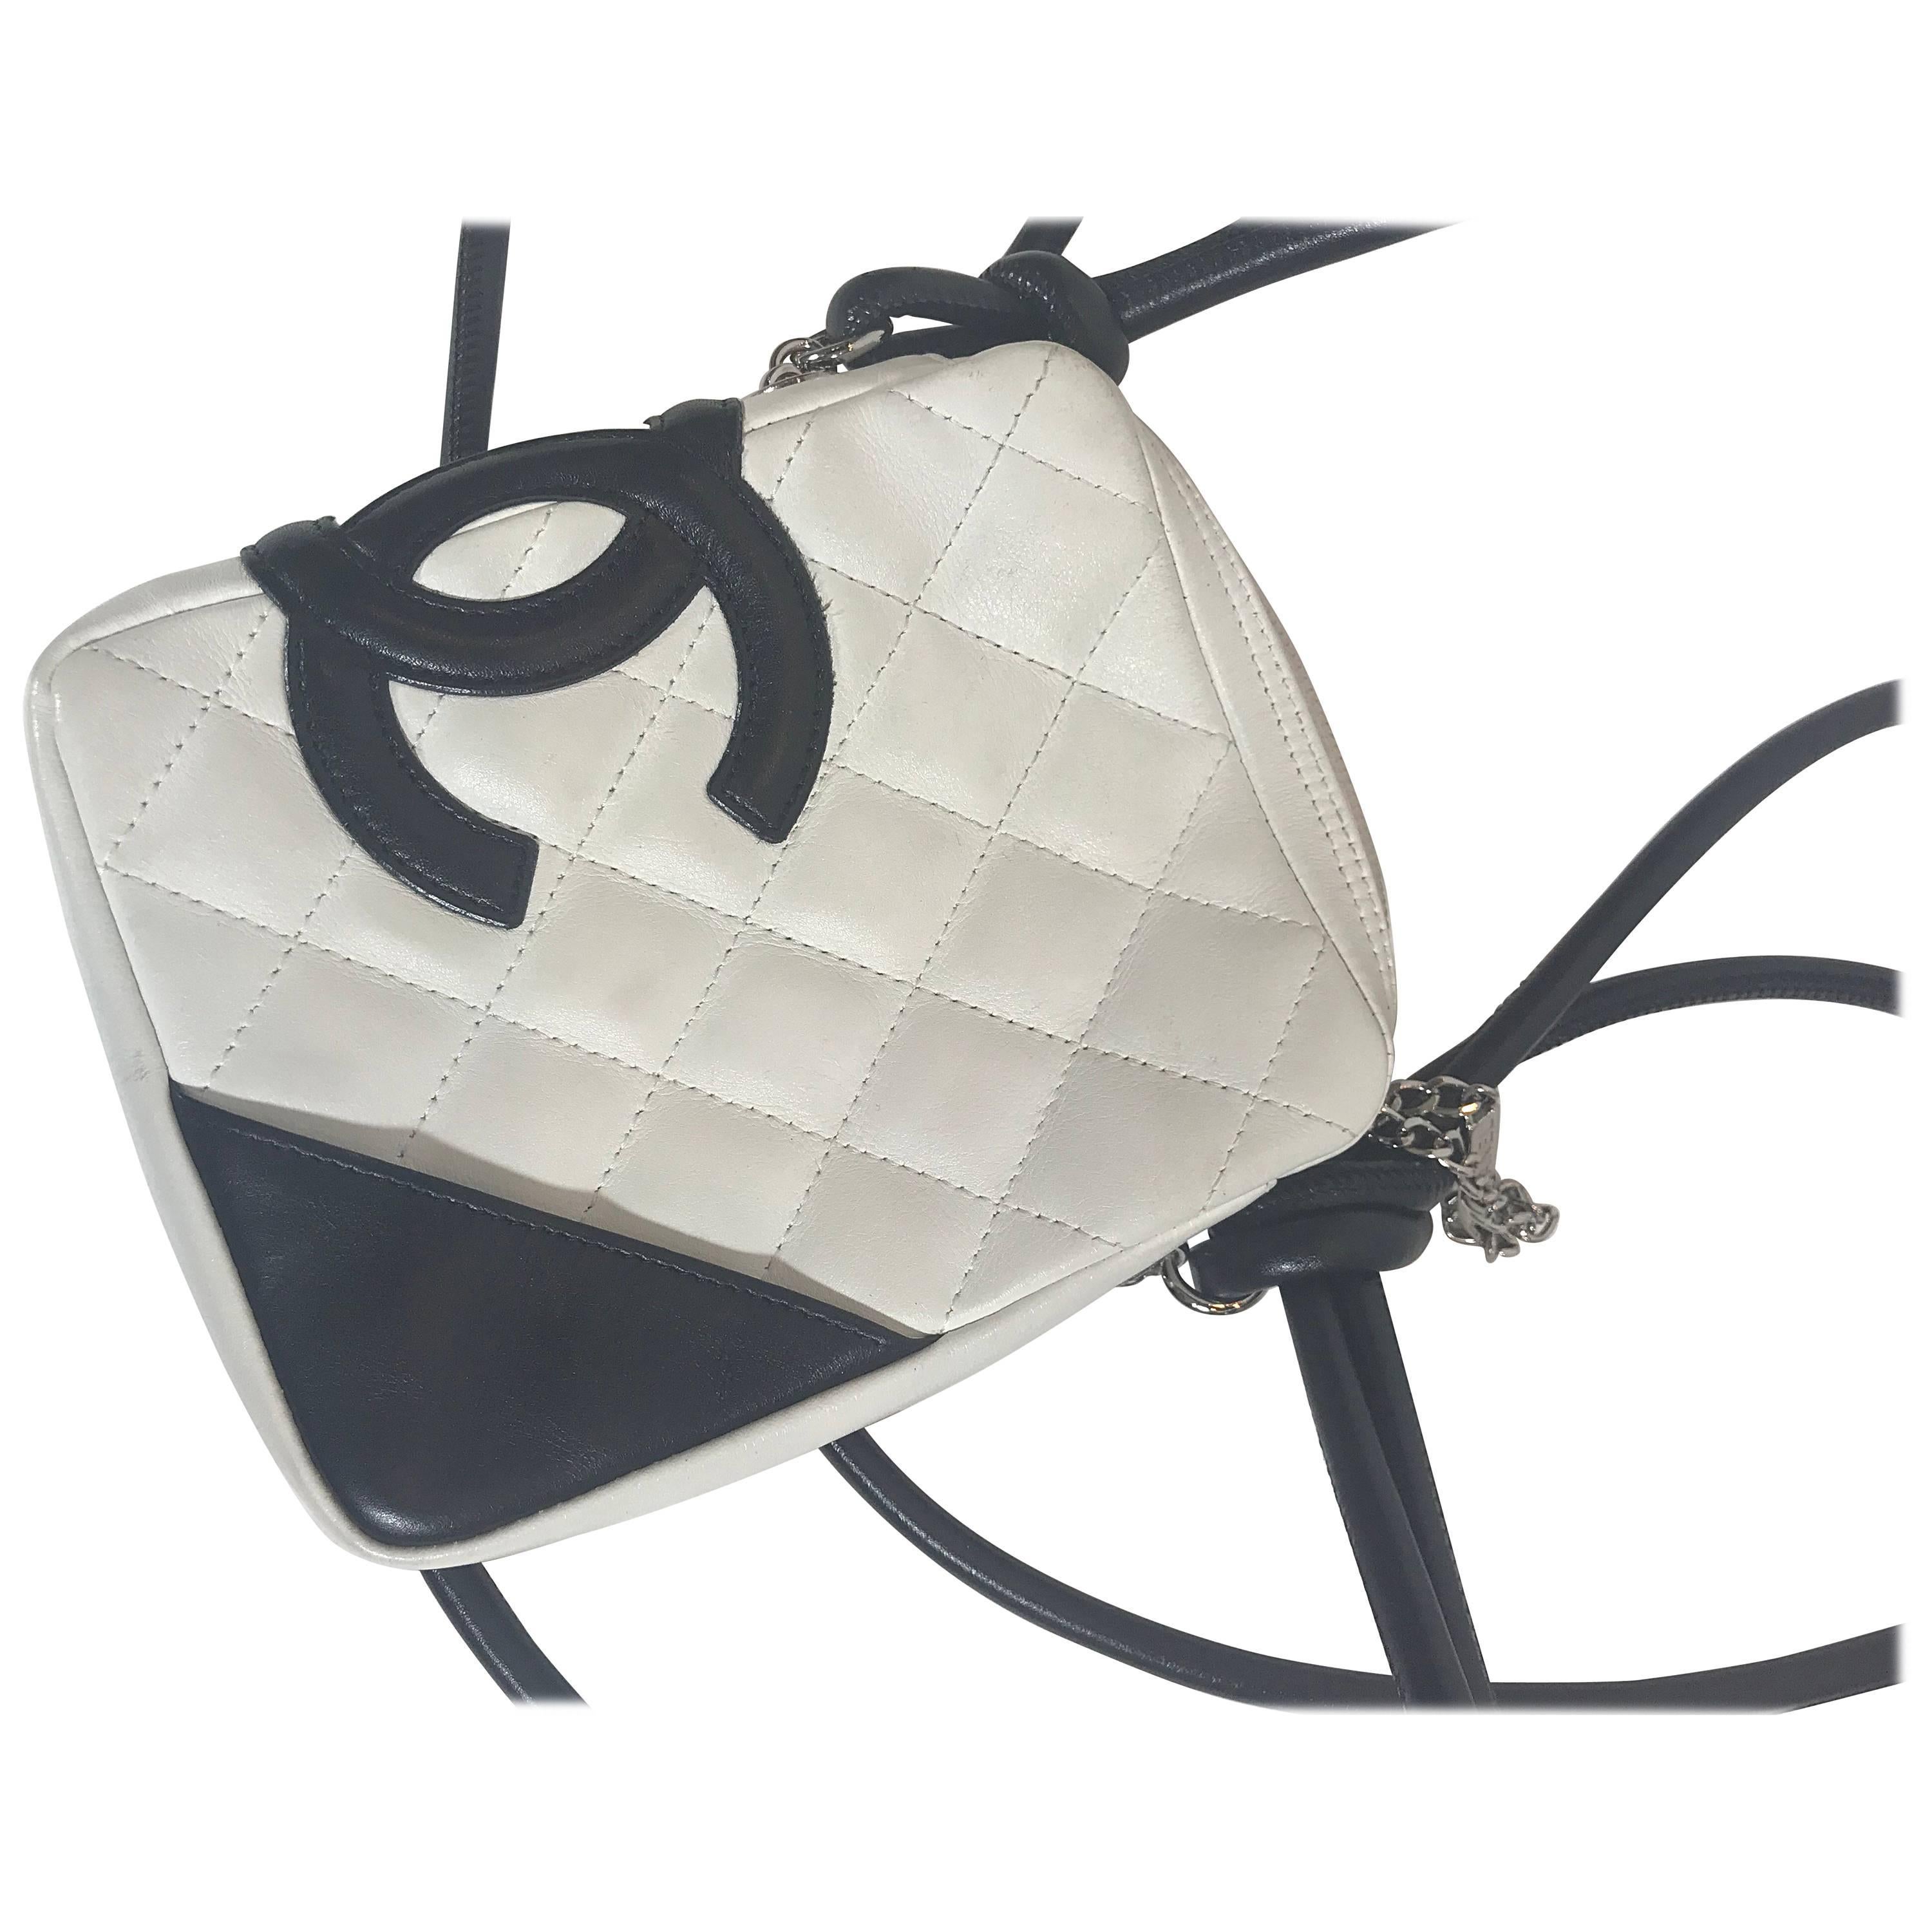 Chanel Cambon White/Black Leather Cross Body Bag For Sale